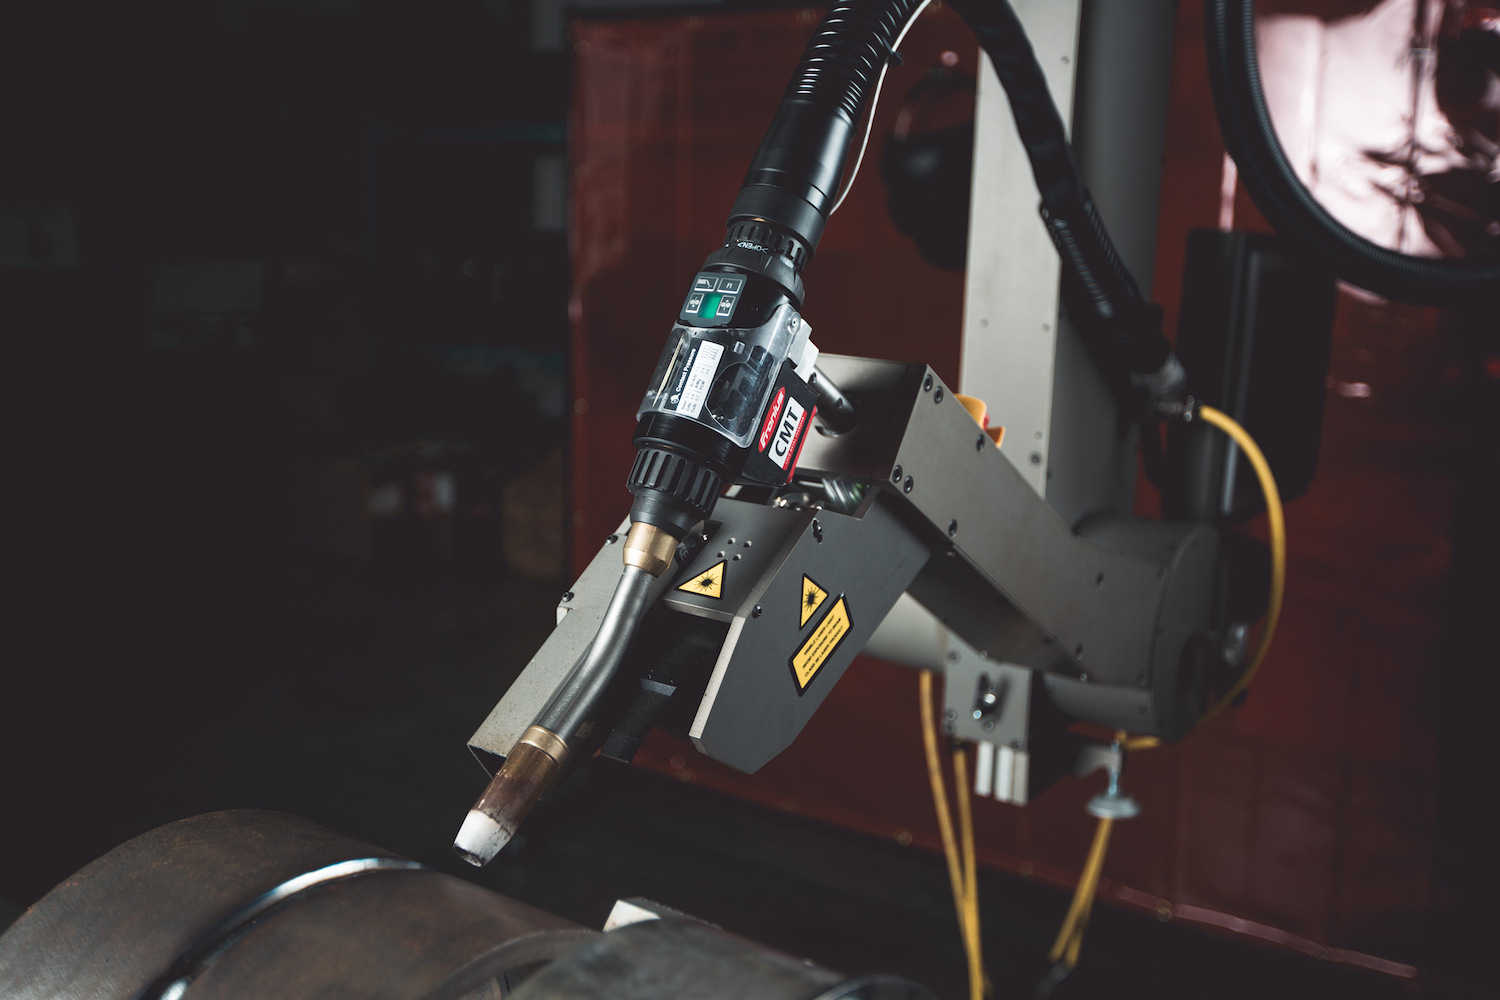 Close up view of the Novarc robotic welding system